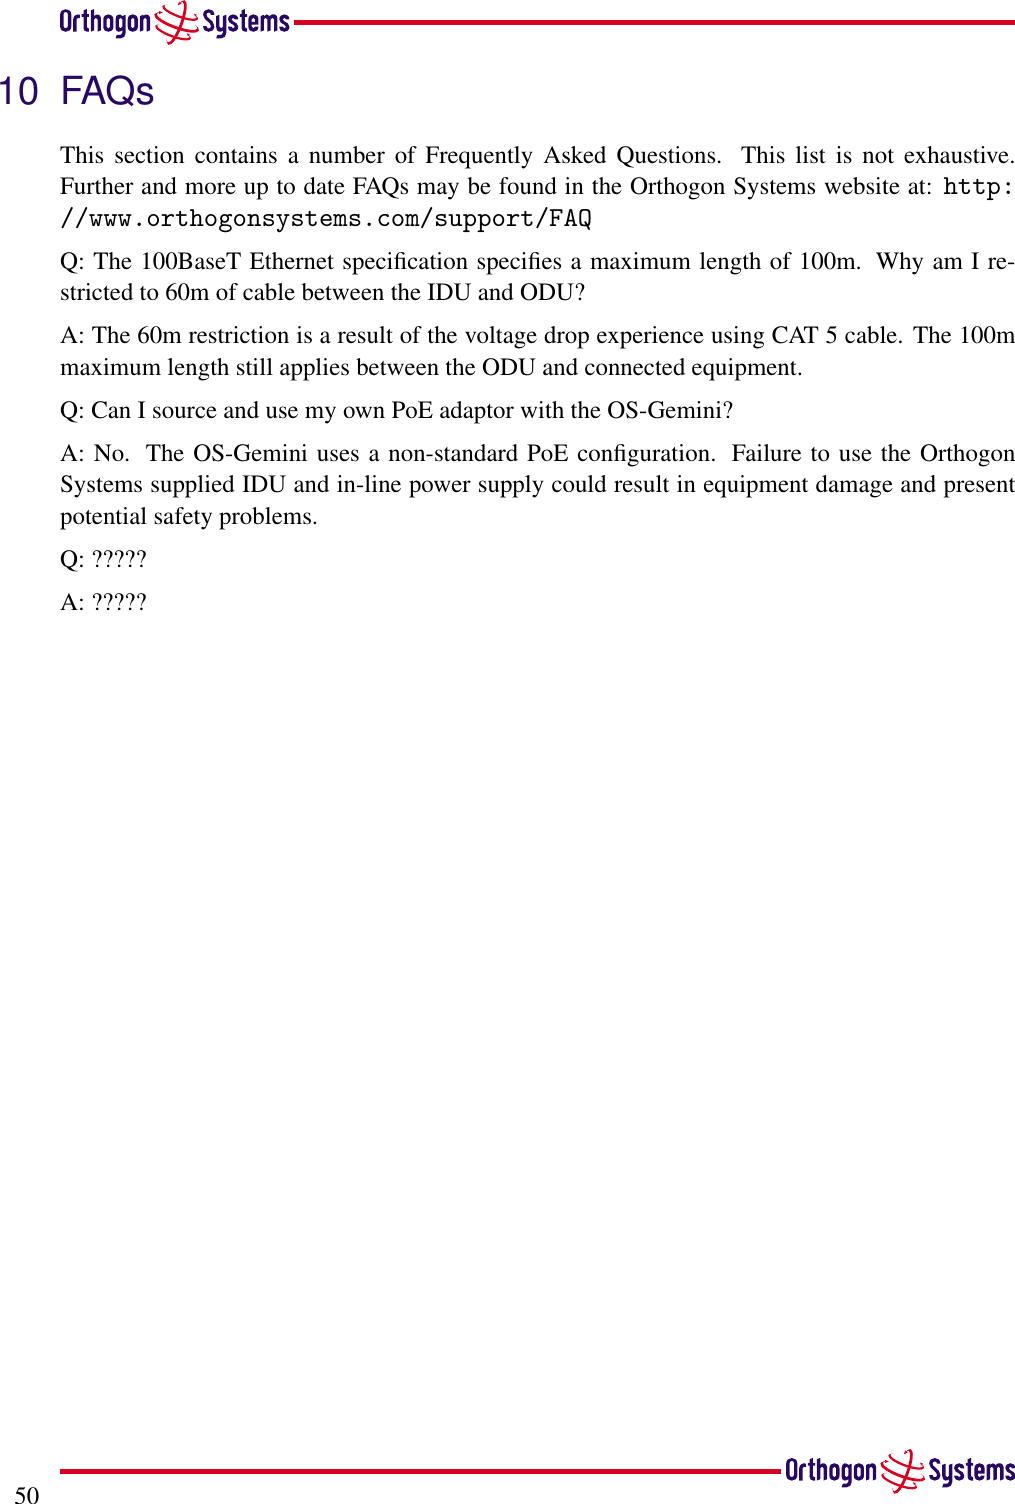 5010 FAQsThis section contains a number of Frequently Asked Questions. This list is not exhaustive.Further and more up to date FAQs may be found in the Orthogon Systems website at: http://www.orthogonsystems.com/support/FAQQ: The 100BaseT Ethernet speciﬁcation speciﬁes a maximum length of 100m. Why am I re-stricted to 60m of cable between the IDU and ODU?A: The 60m restriction is a result of the voltage drop experience using CAT 5 cable. The 100mmaximum length still applies between the ODU and connected equipment.Q: Can I source and use my own PoE adaptor with the OS-Gemini?A: No. The OS-Gemini uses a non-standard PoE conﬁguration. Failure to use the OrthogonSystems supplied IDU and in-line power supply could result in equipment damage and presentpotential safety problems.Q: ?????A: ?????